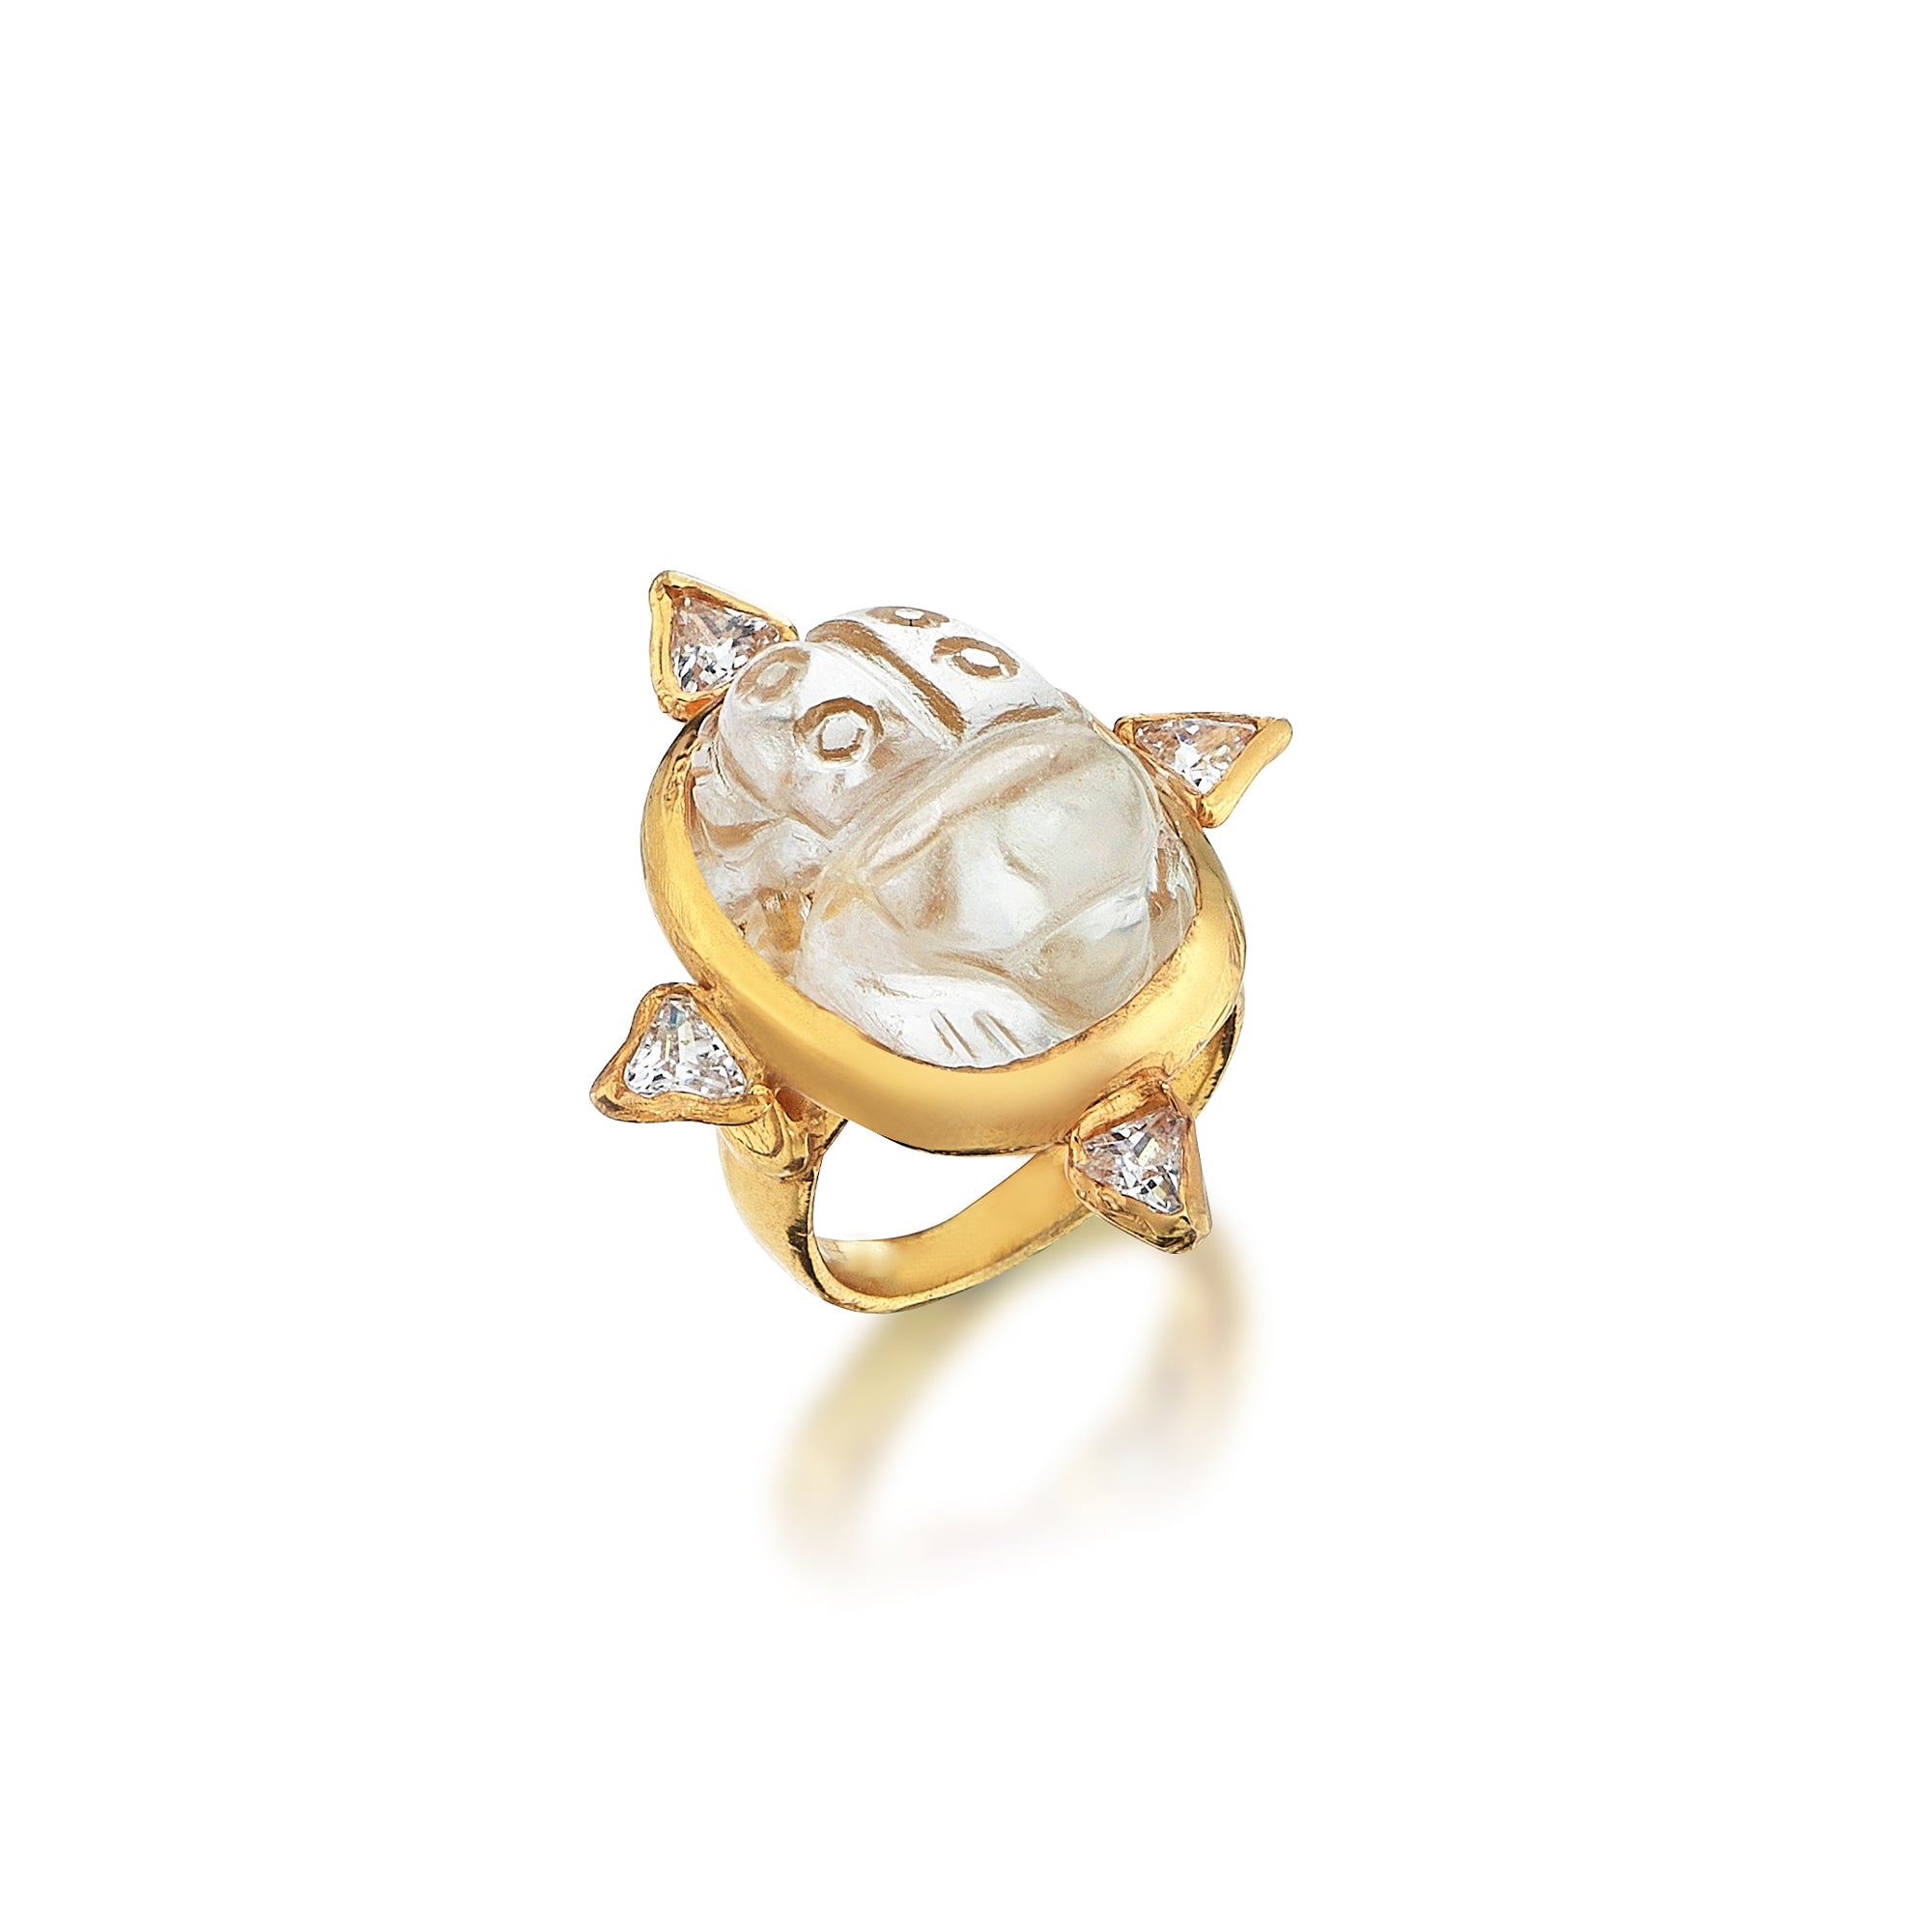 THE STAR SCARAB RING